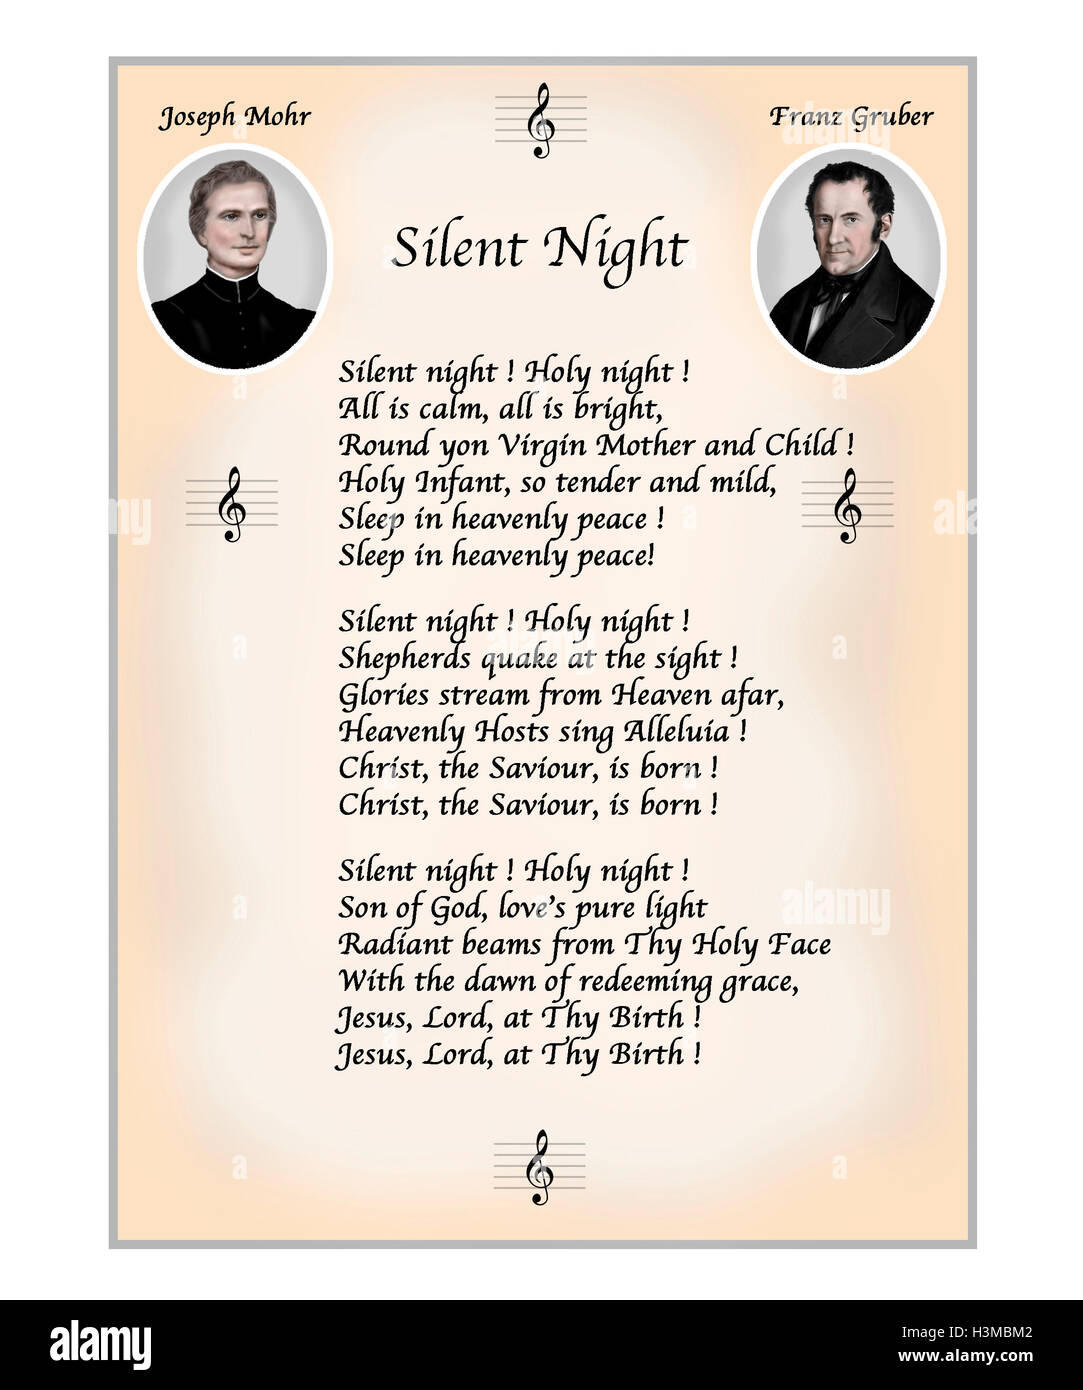 Silent Night. English Text. Modern Illustration with portraits of poet Joseph Mohr and composer Franz Gruber Stock Photo